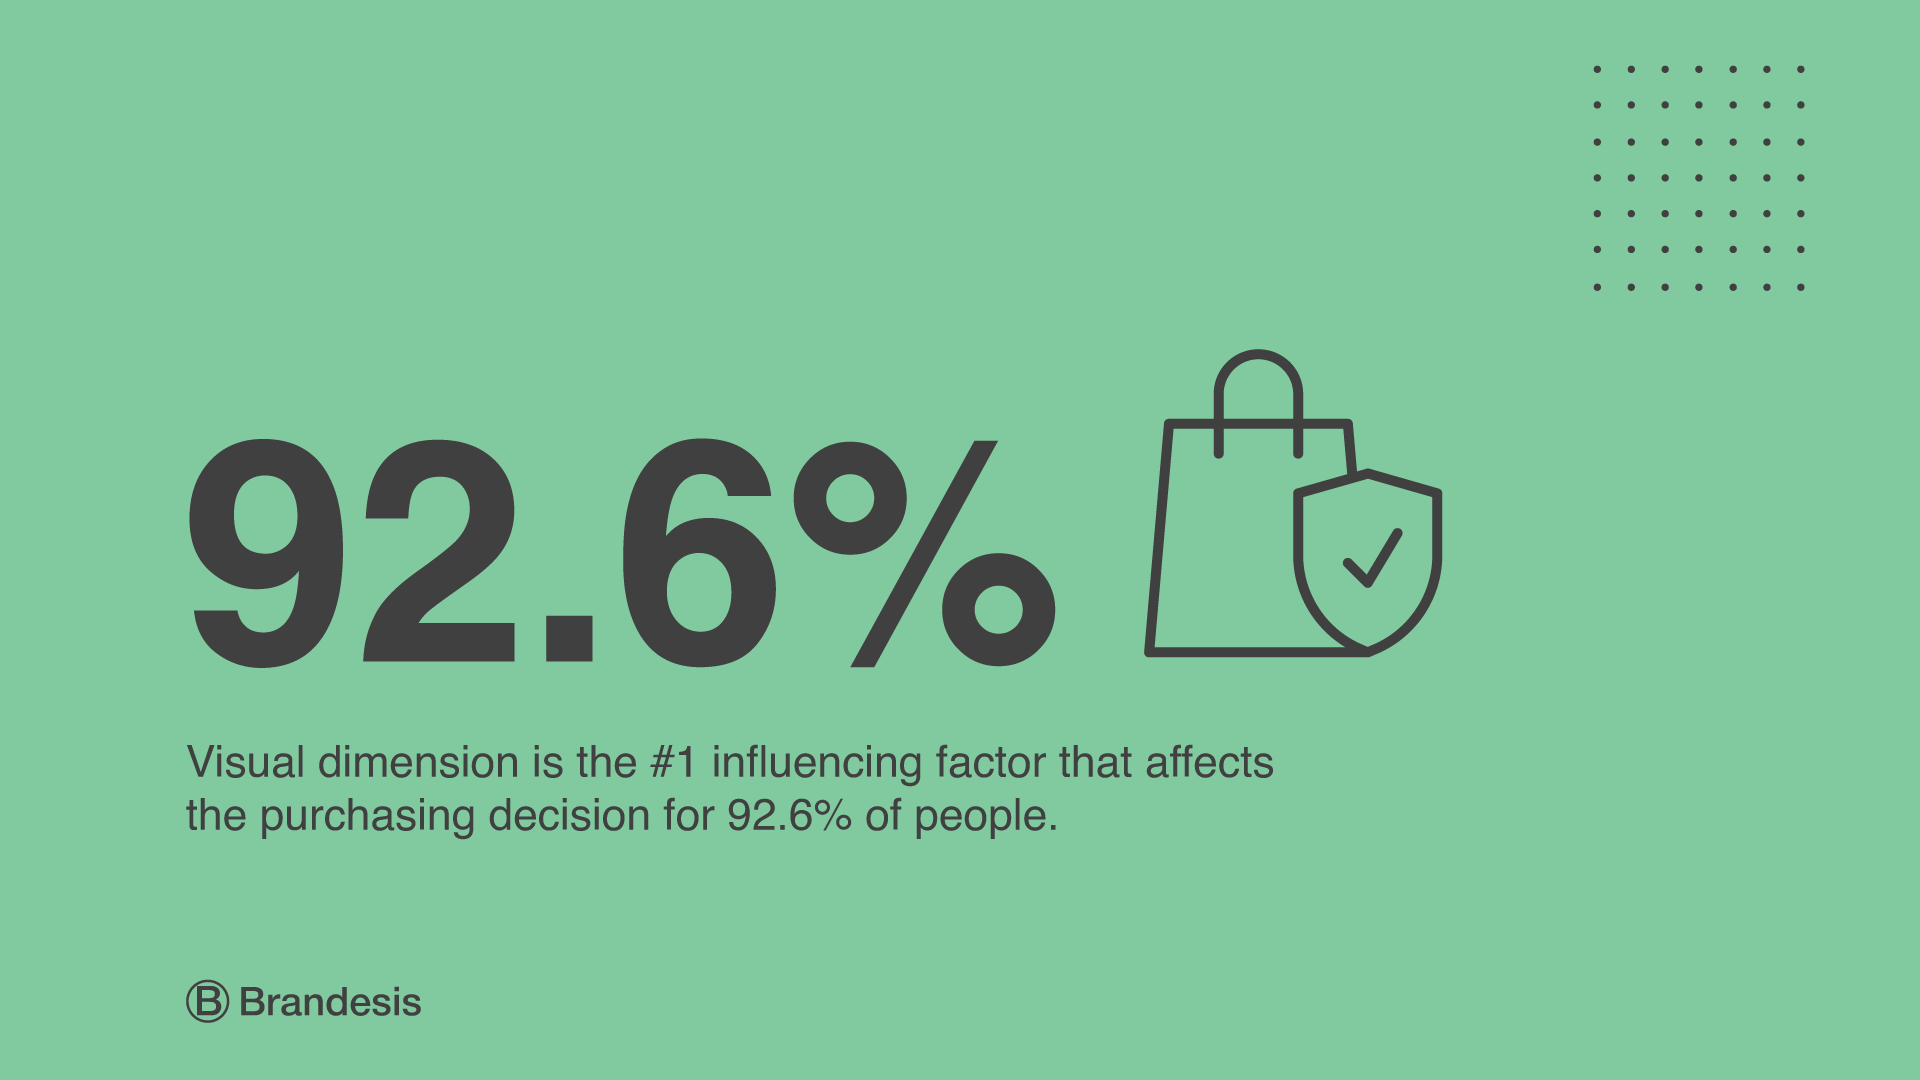 Visual dimension is the #1 influencing factor that affects the purchasing decision for 92.6% of people.